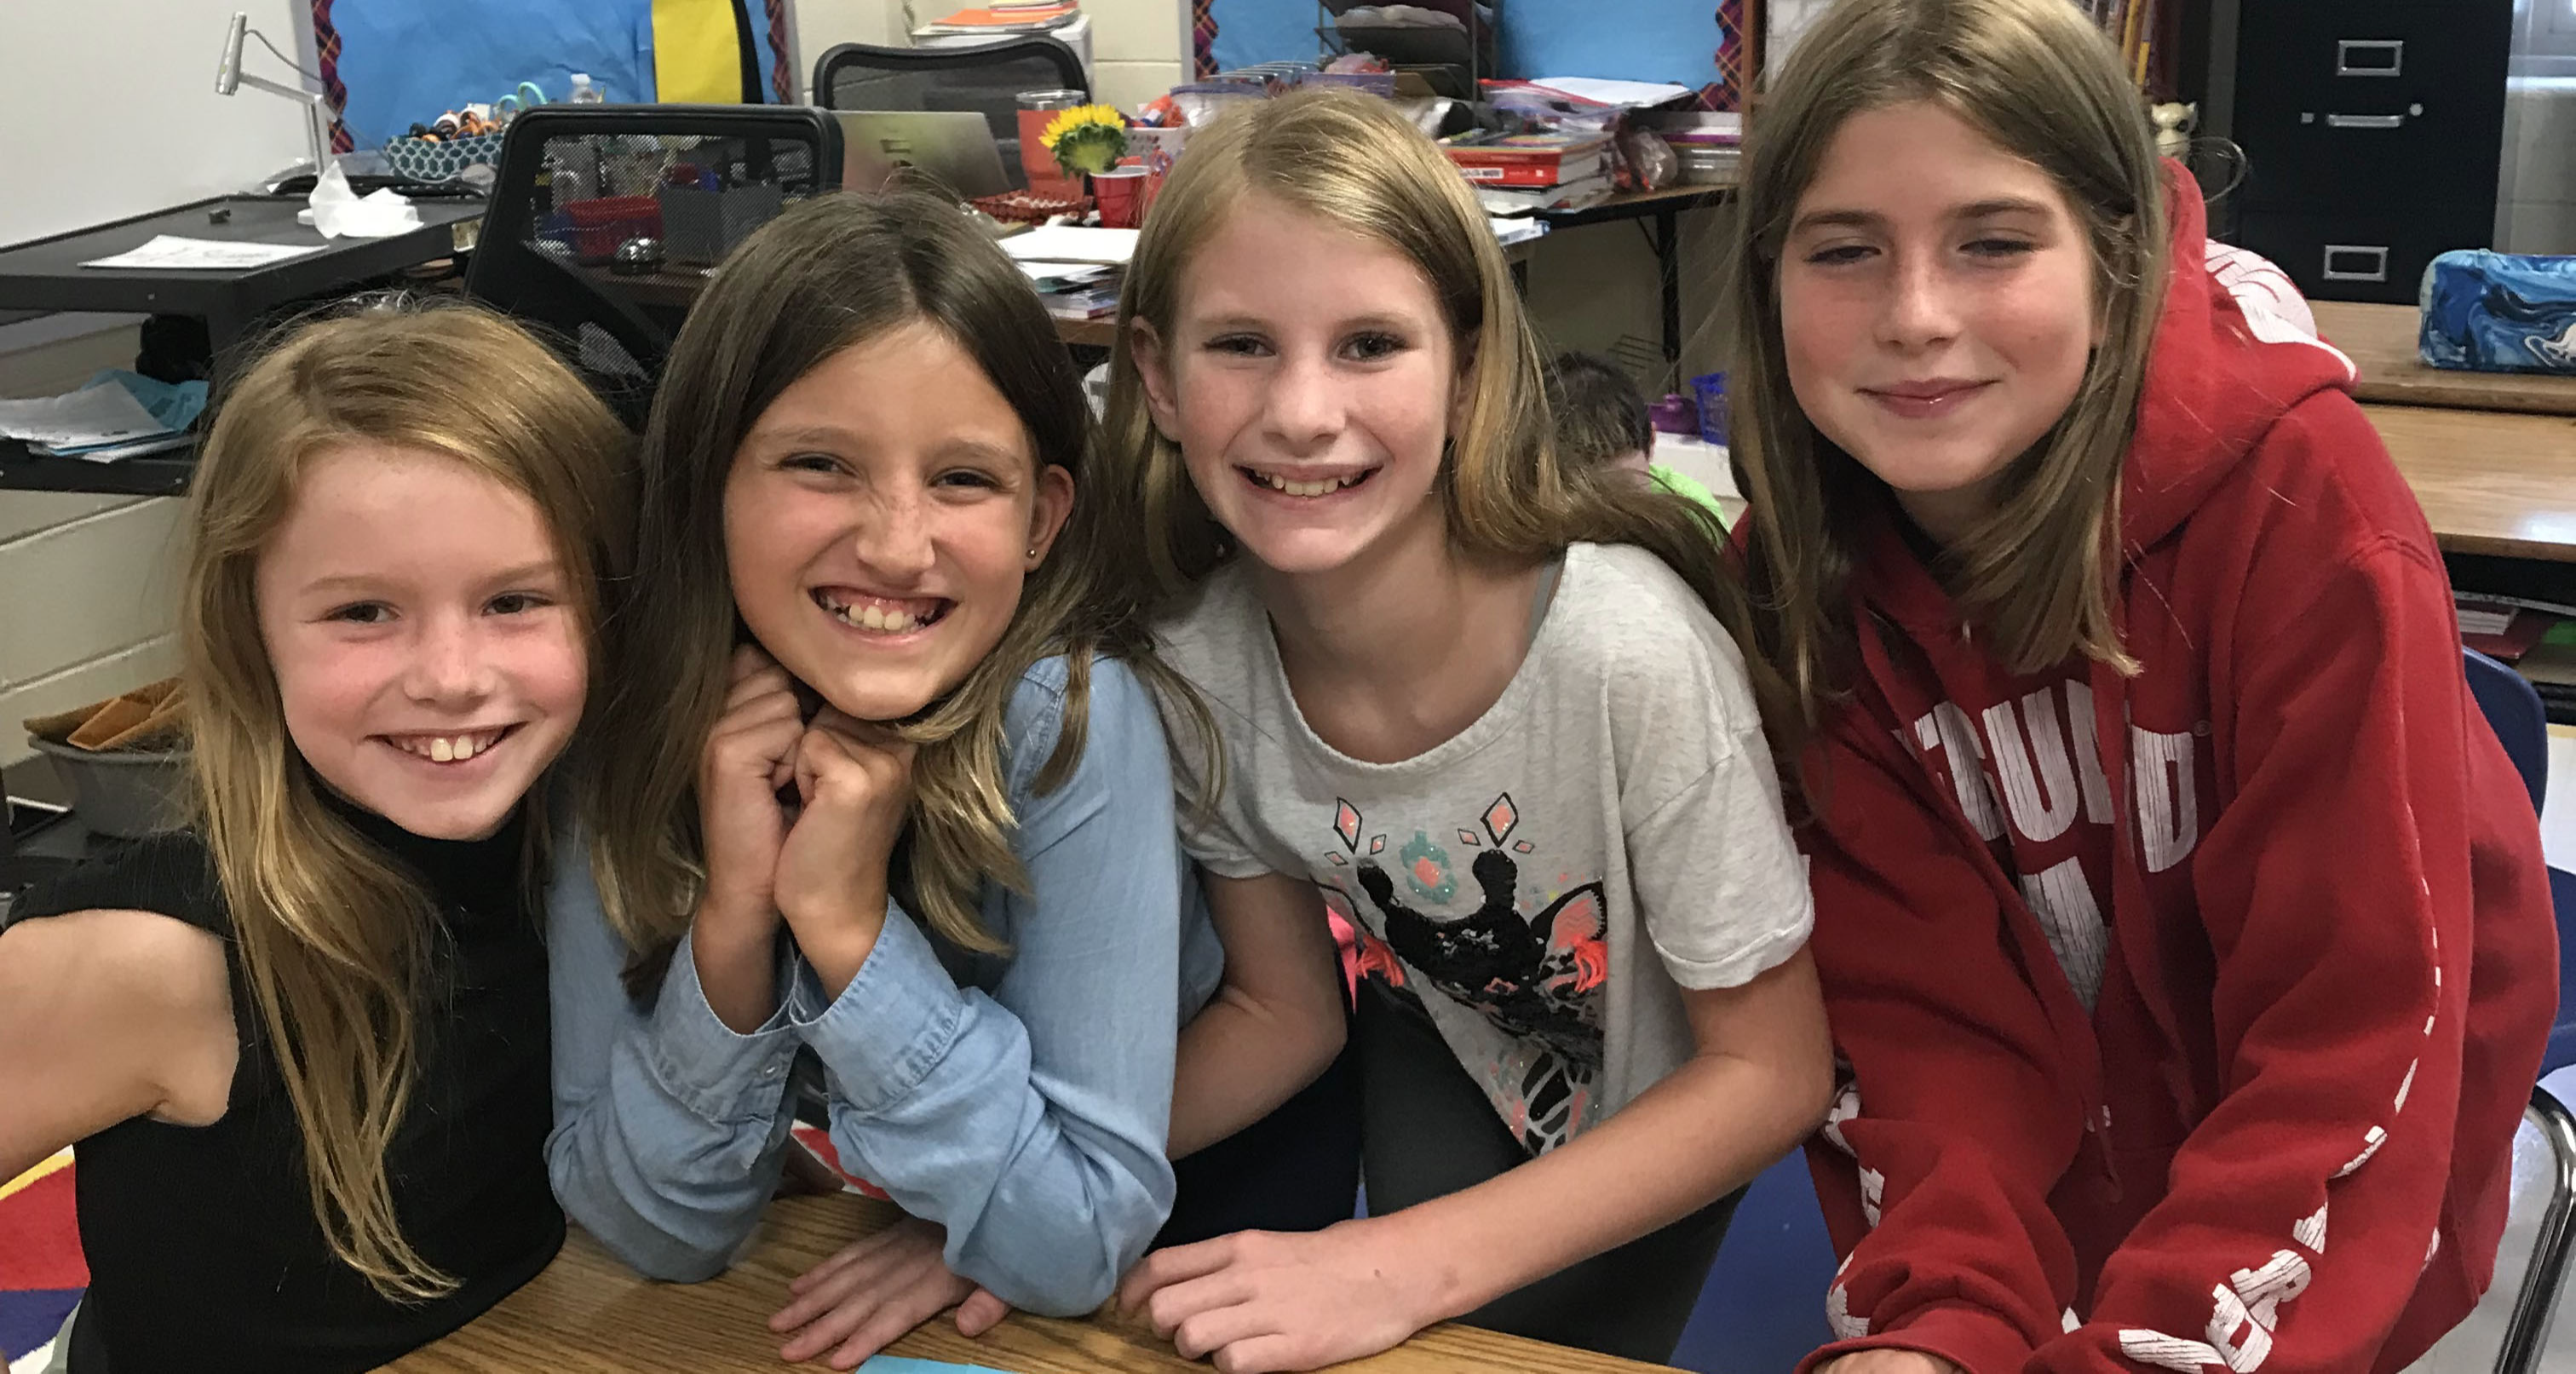 Four girls pose for a photo together in class